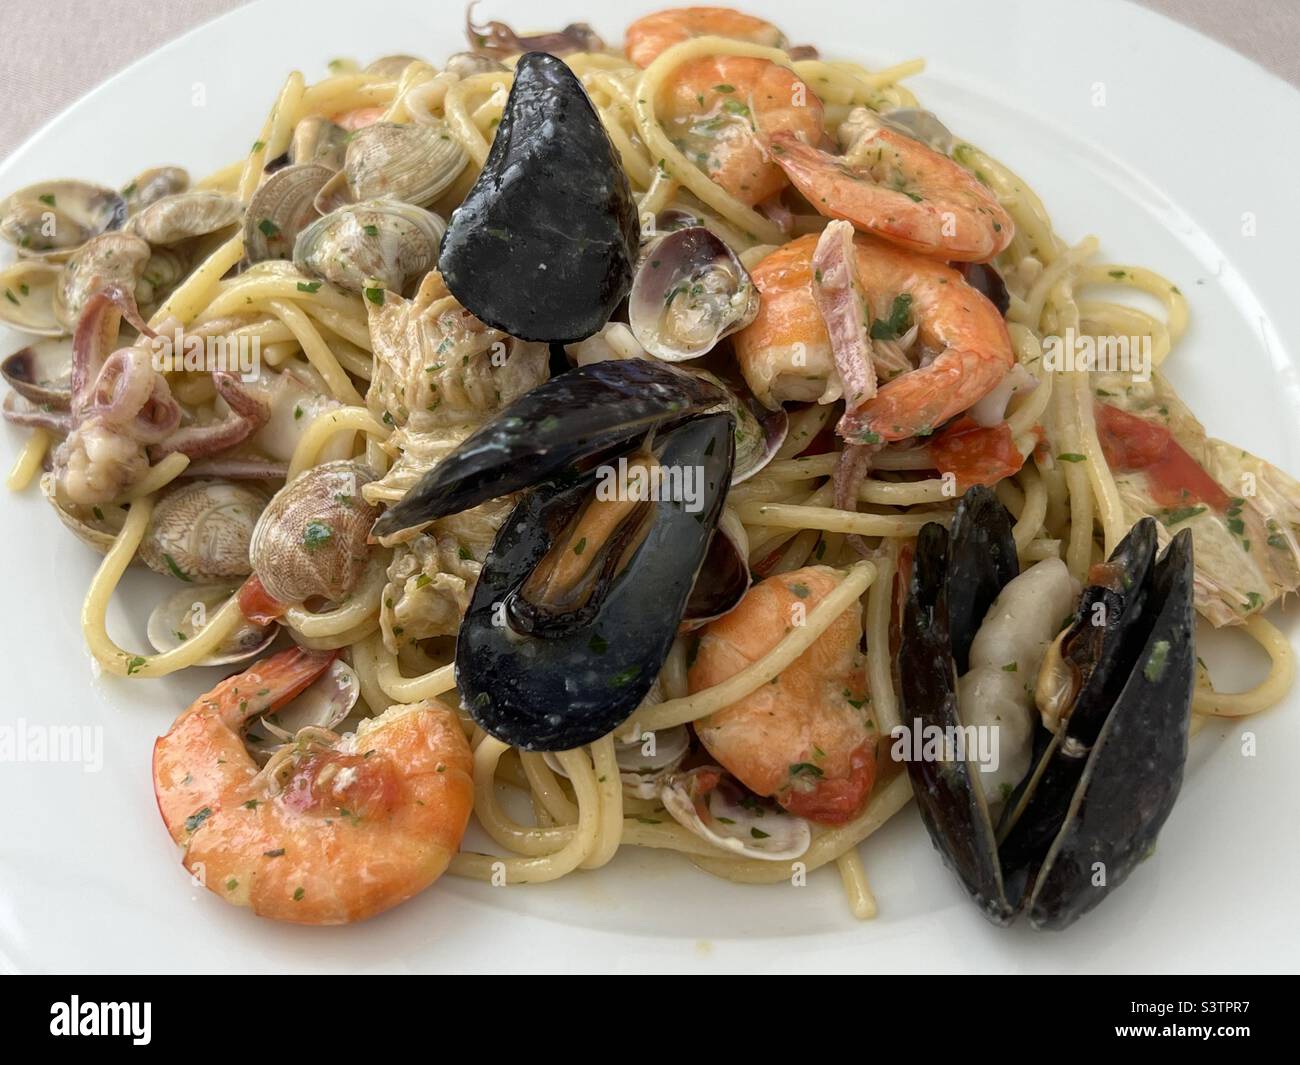 Noodles with seafood at the restaurant Stock Photo